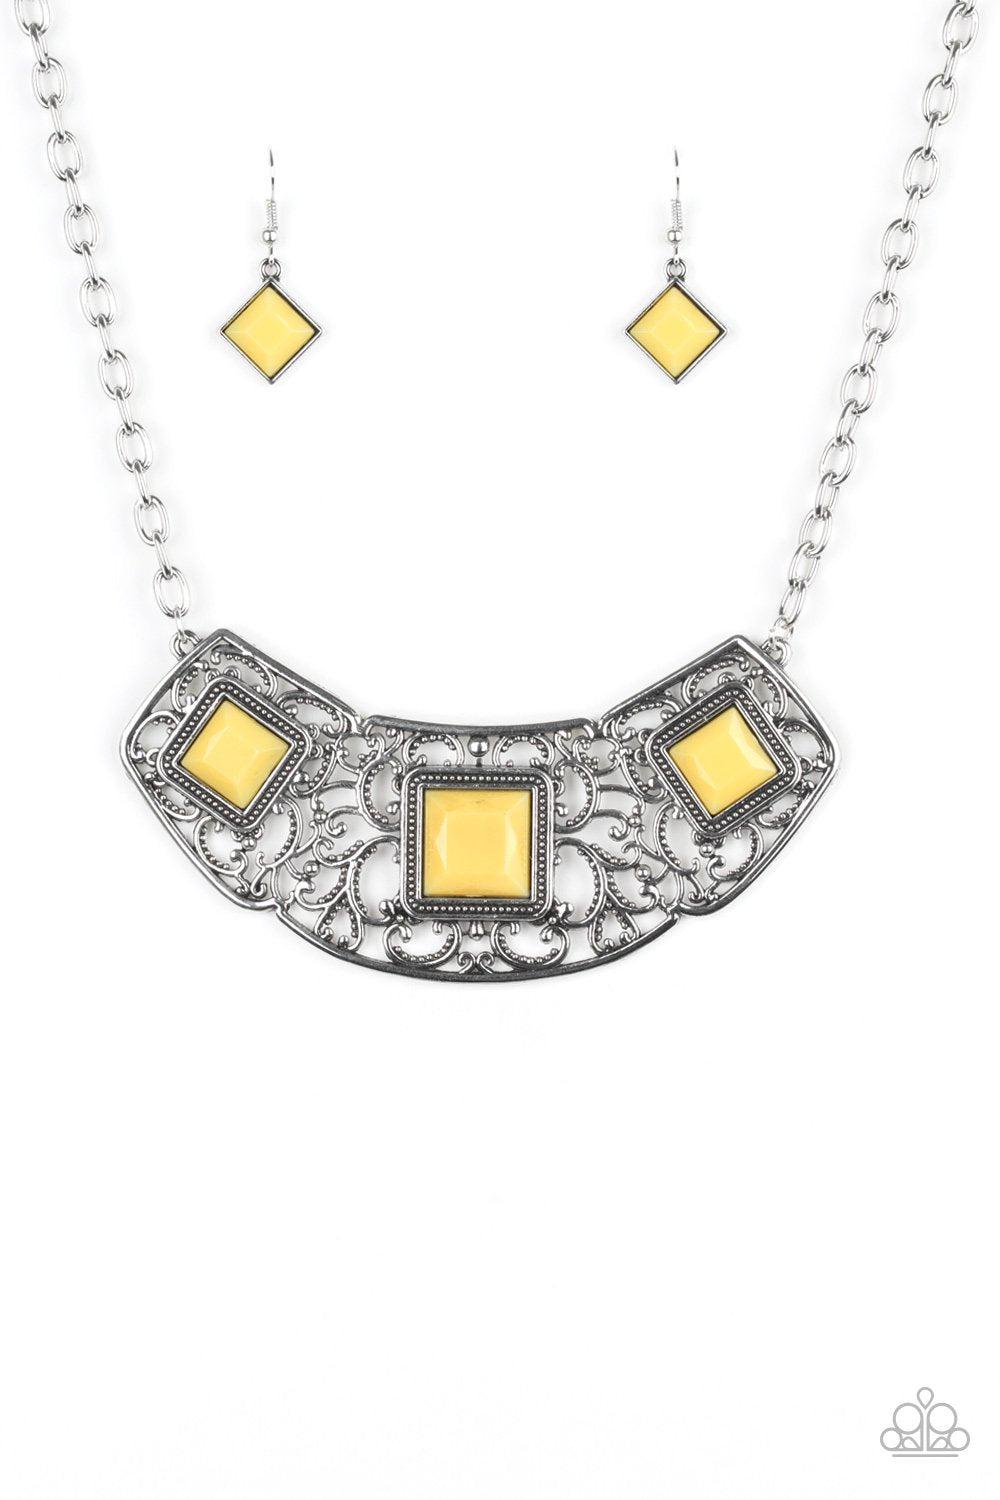 Feeling Inde-PENDANT Yellow and Silver Necklace - Paparazzi Accessories - lightbox -CarasShop.com - $5 Jewelry by Cara Jewels